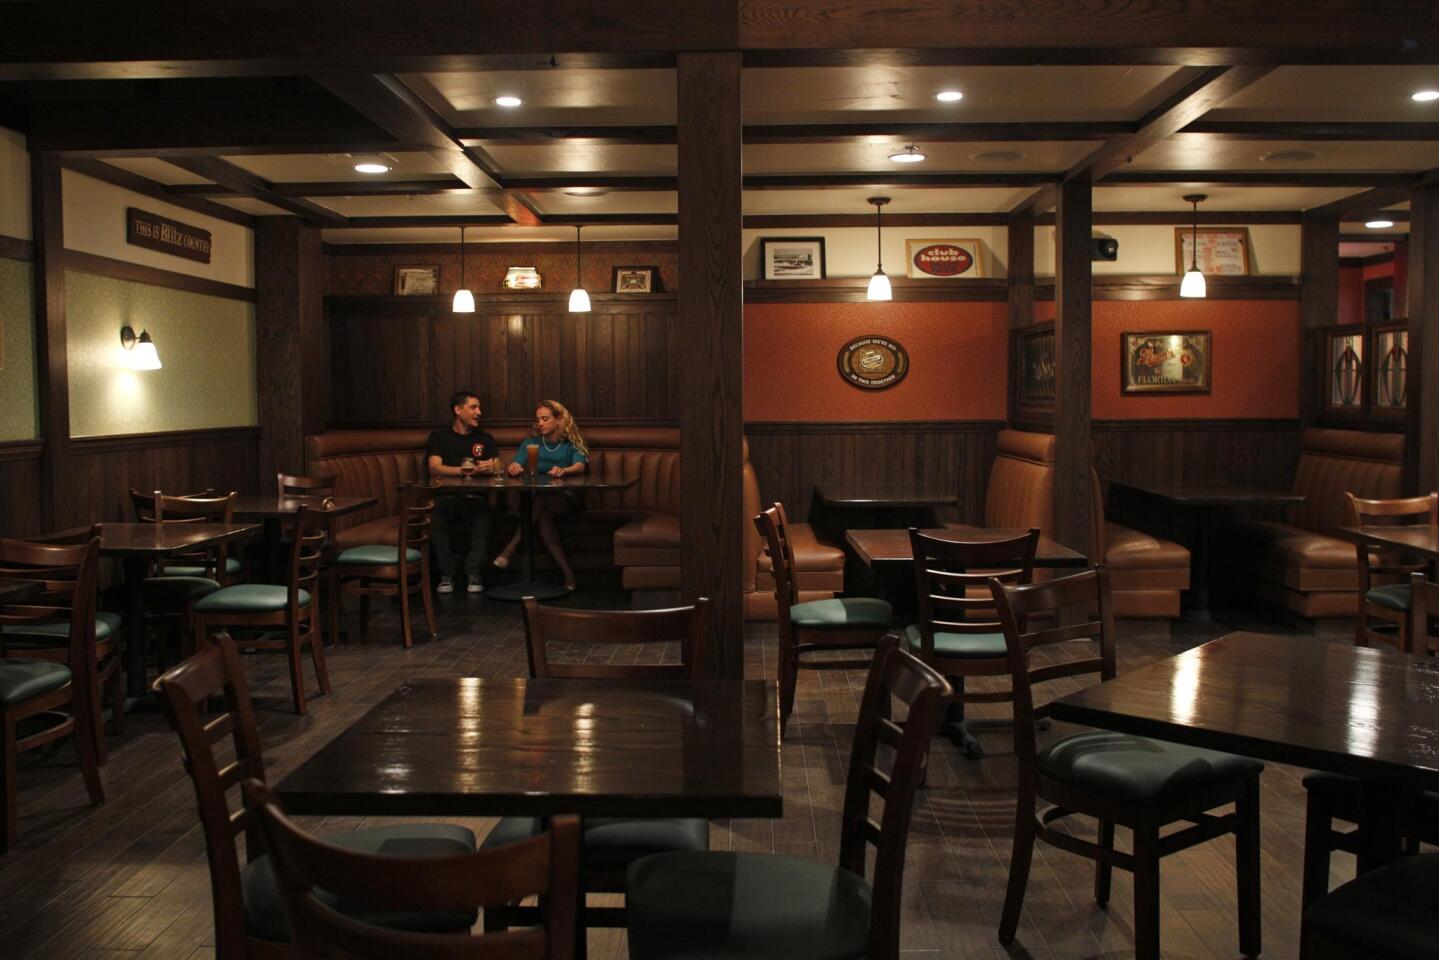 The hidden, sprawling private-event space at the Atwater Village pub is opening its door for a Super Bowl party featuring a 120-inch screen, the pub menu and an assortment of GRB brews. There's no cover; RSVPs are highly recommended. The game will also be screened on the TVs in the main Golden Road pub.